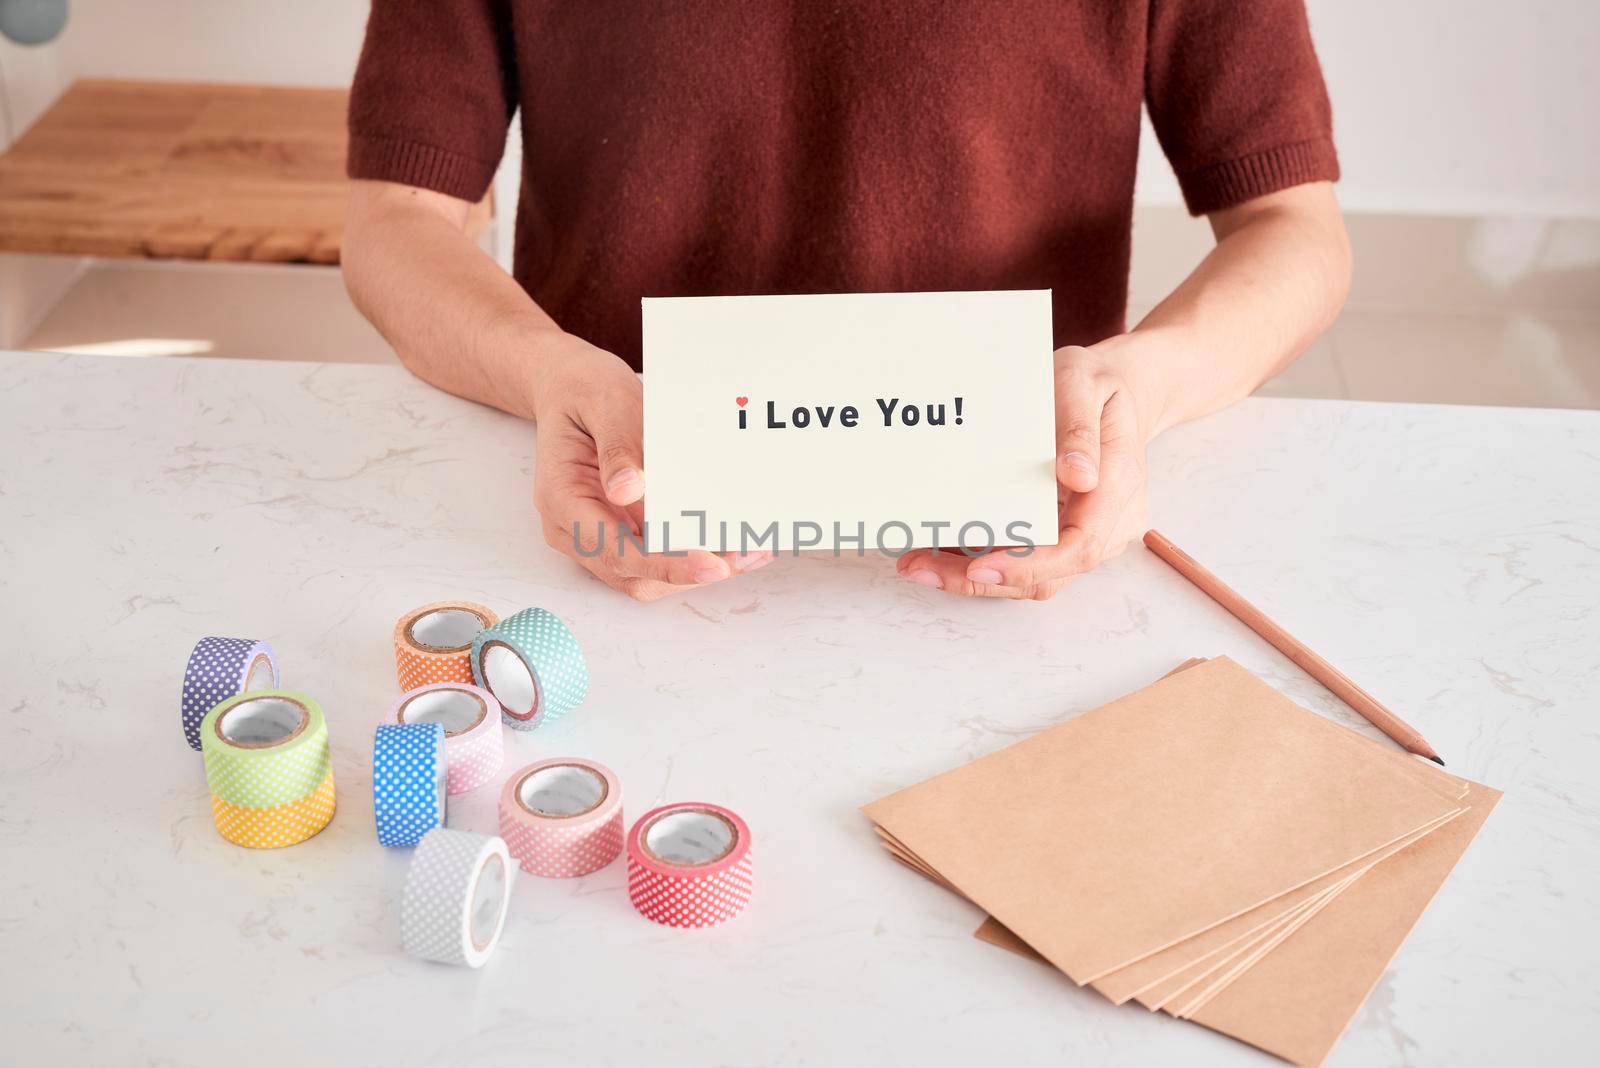 hands holding greeting card with phrase letters "i love you" prepared for sweetheart by makidotvn